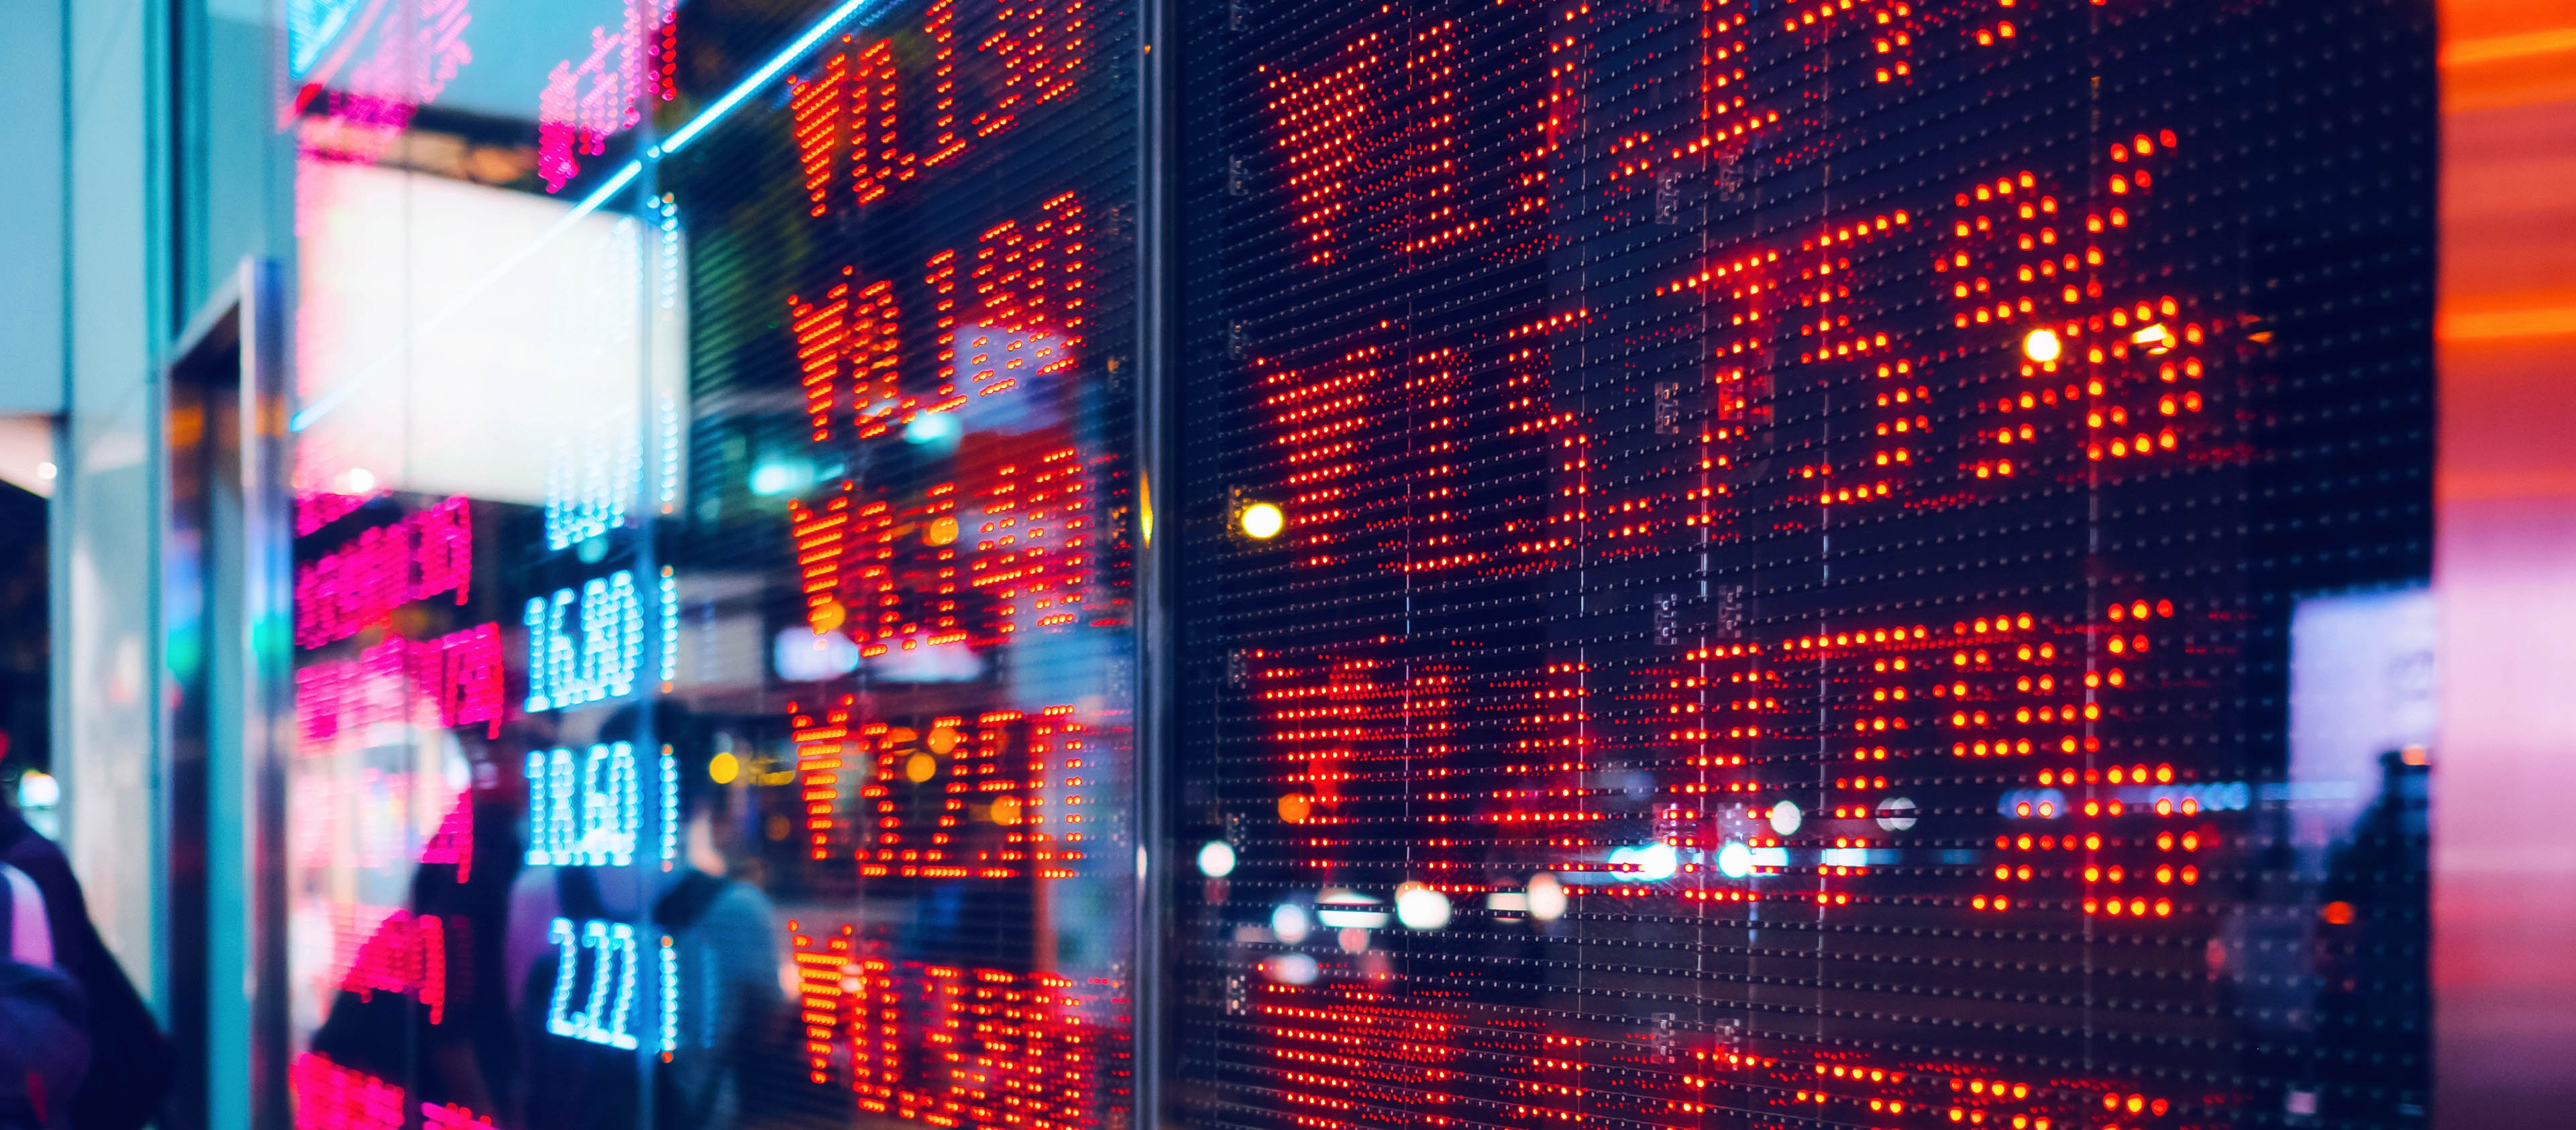 Stock exchange market display screen board showing stock market state in red